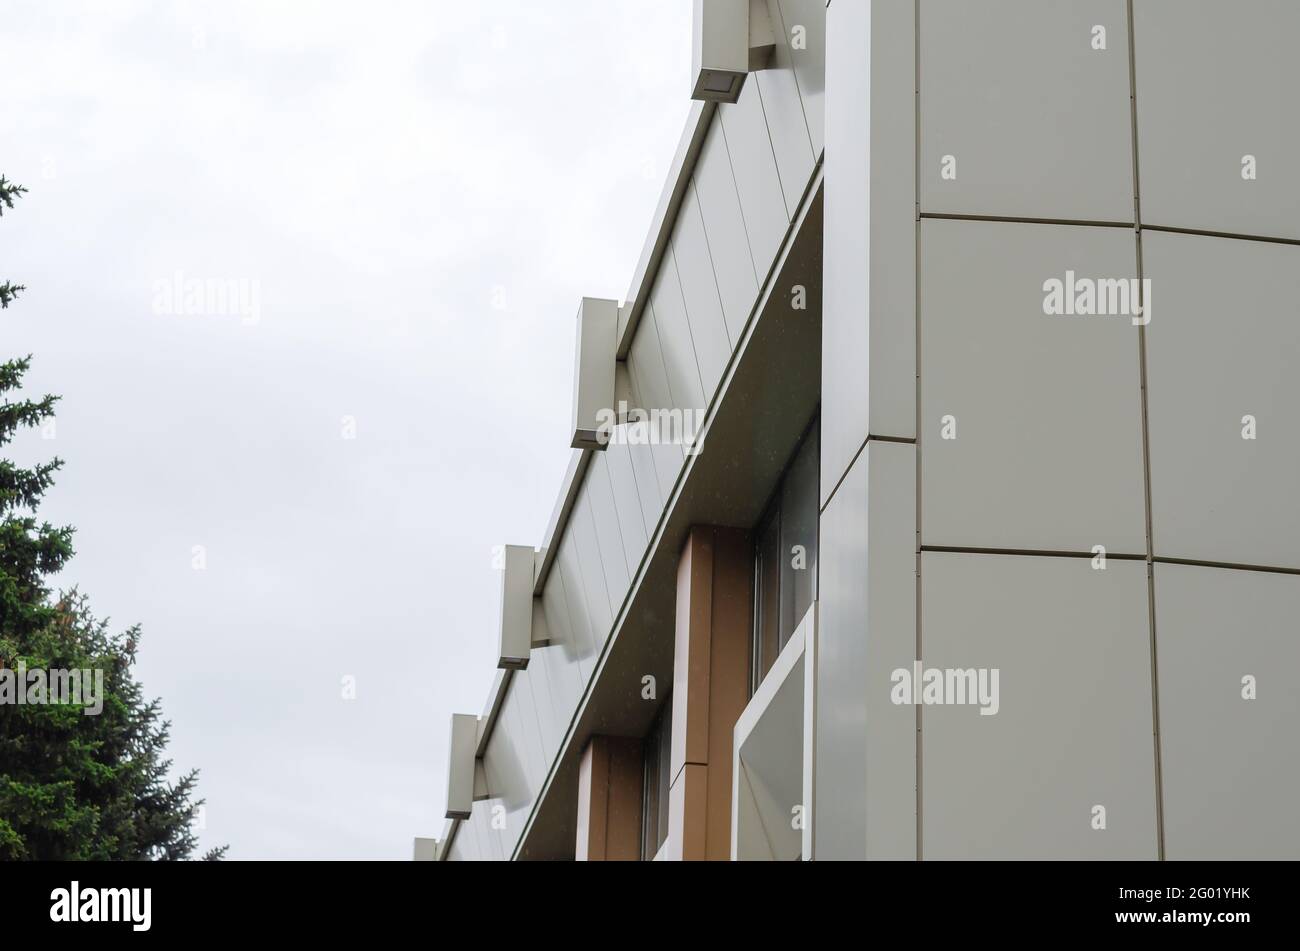 The beige and brown facade of a modern building against an overcast sky. On the left is a tall green fir tree. Daytime. Shooting in the rain. Architec Stock Photo